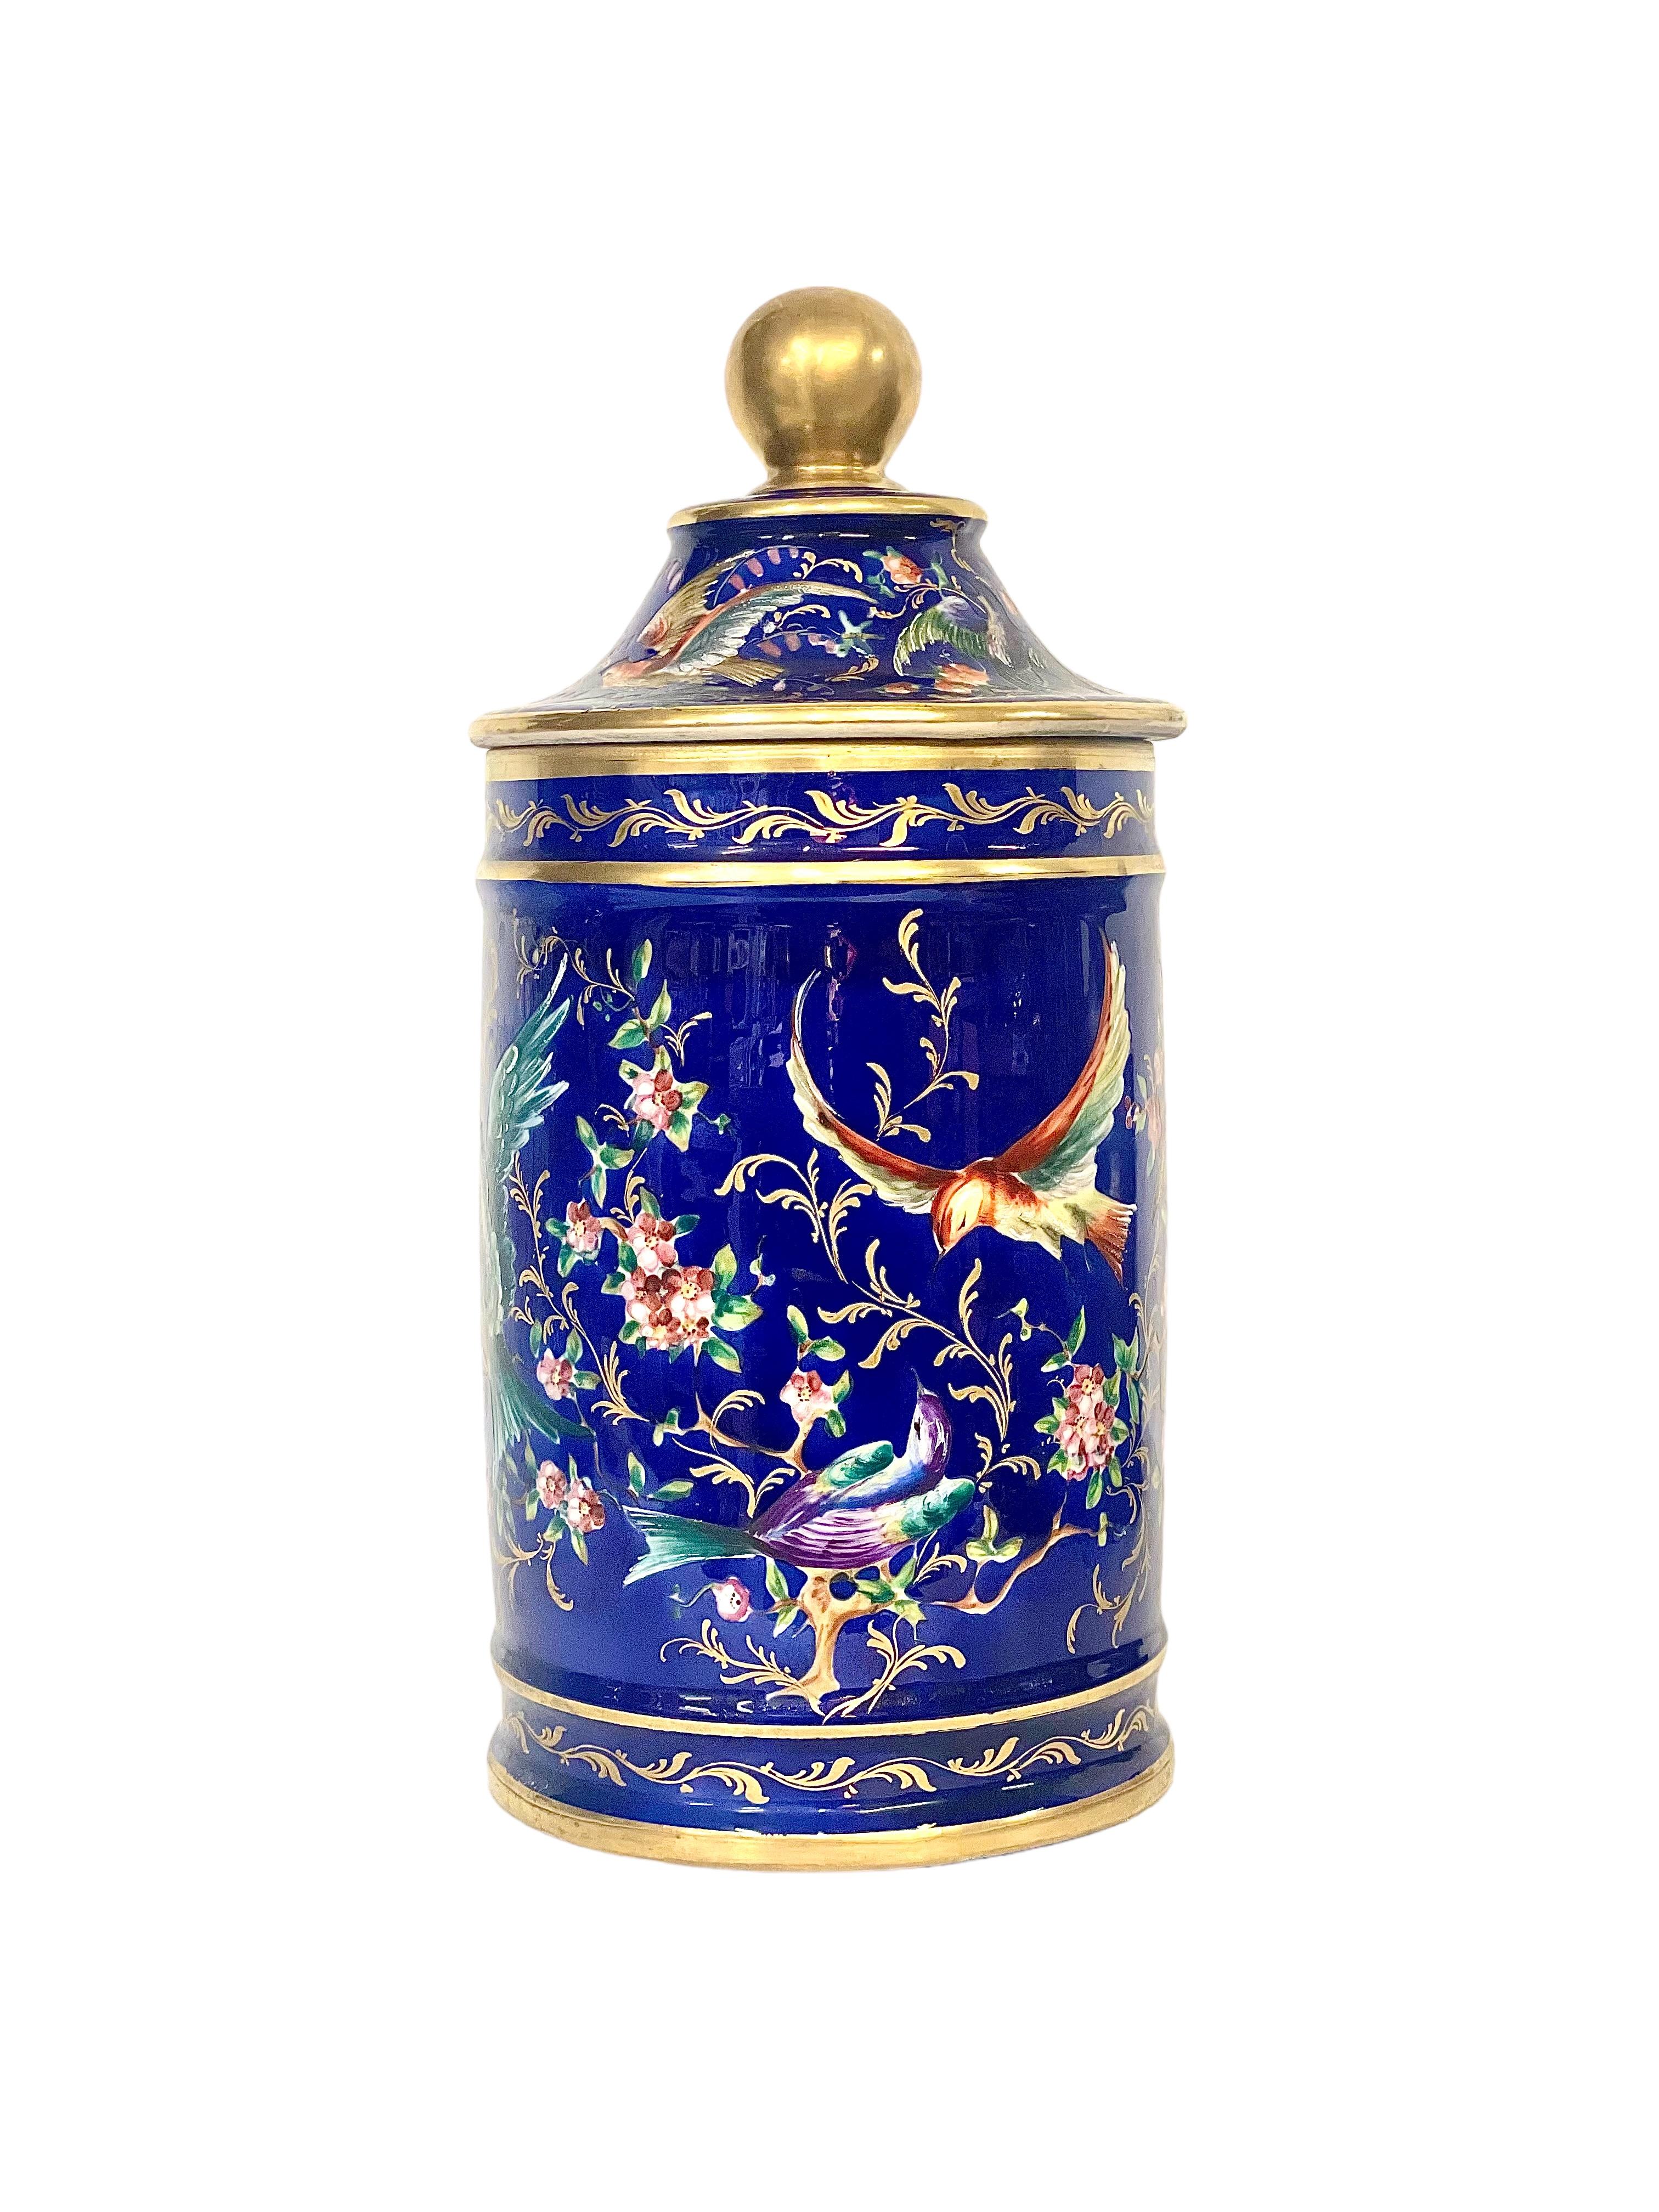 1810s Large Lidded Porcelain Apothecary Jar, 1st Empire Period For Sale 4